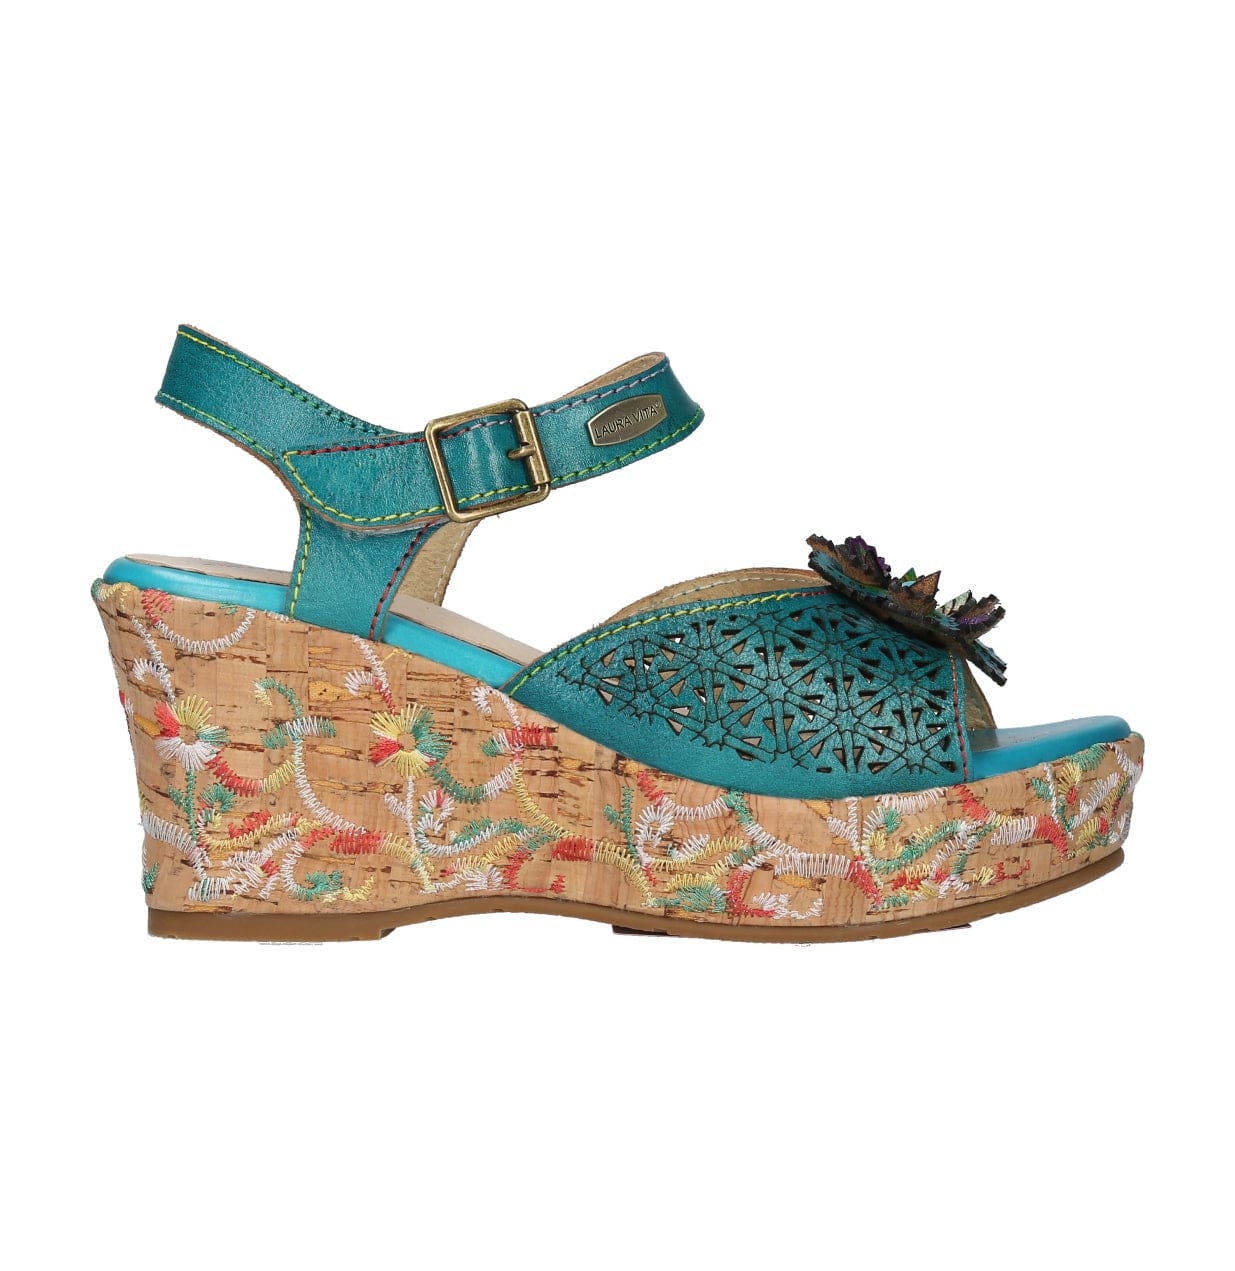 Chaussures LORIEO 08 - 35 / Turquoise - Sandale